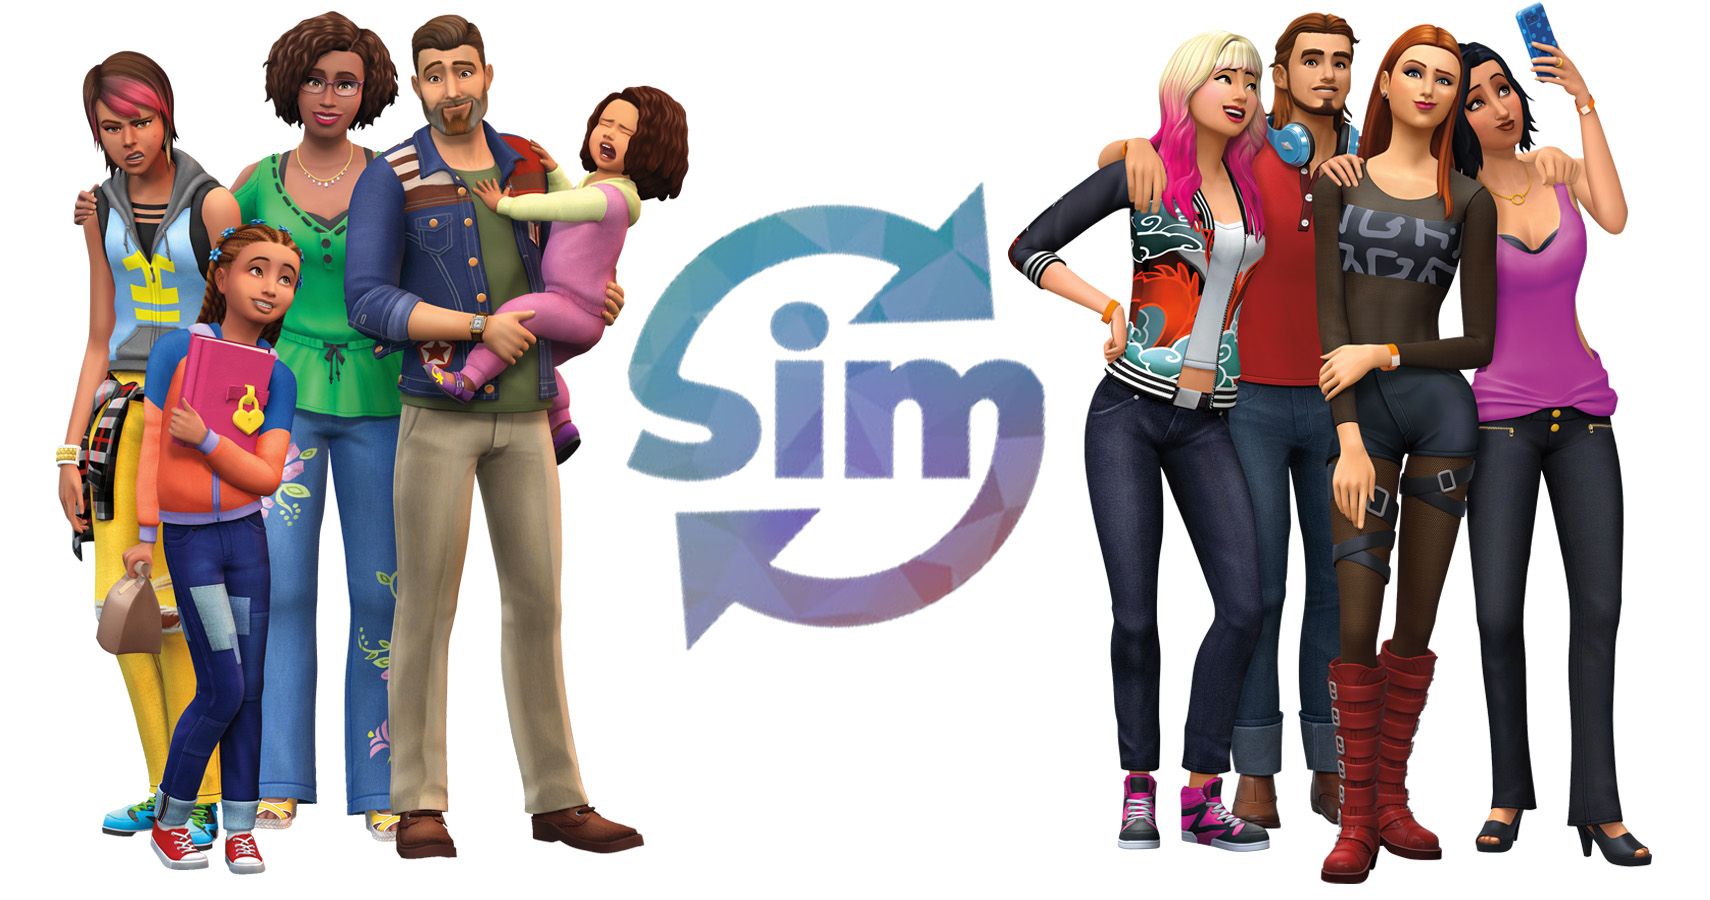 is the sims 4 get together worth it